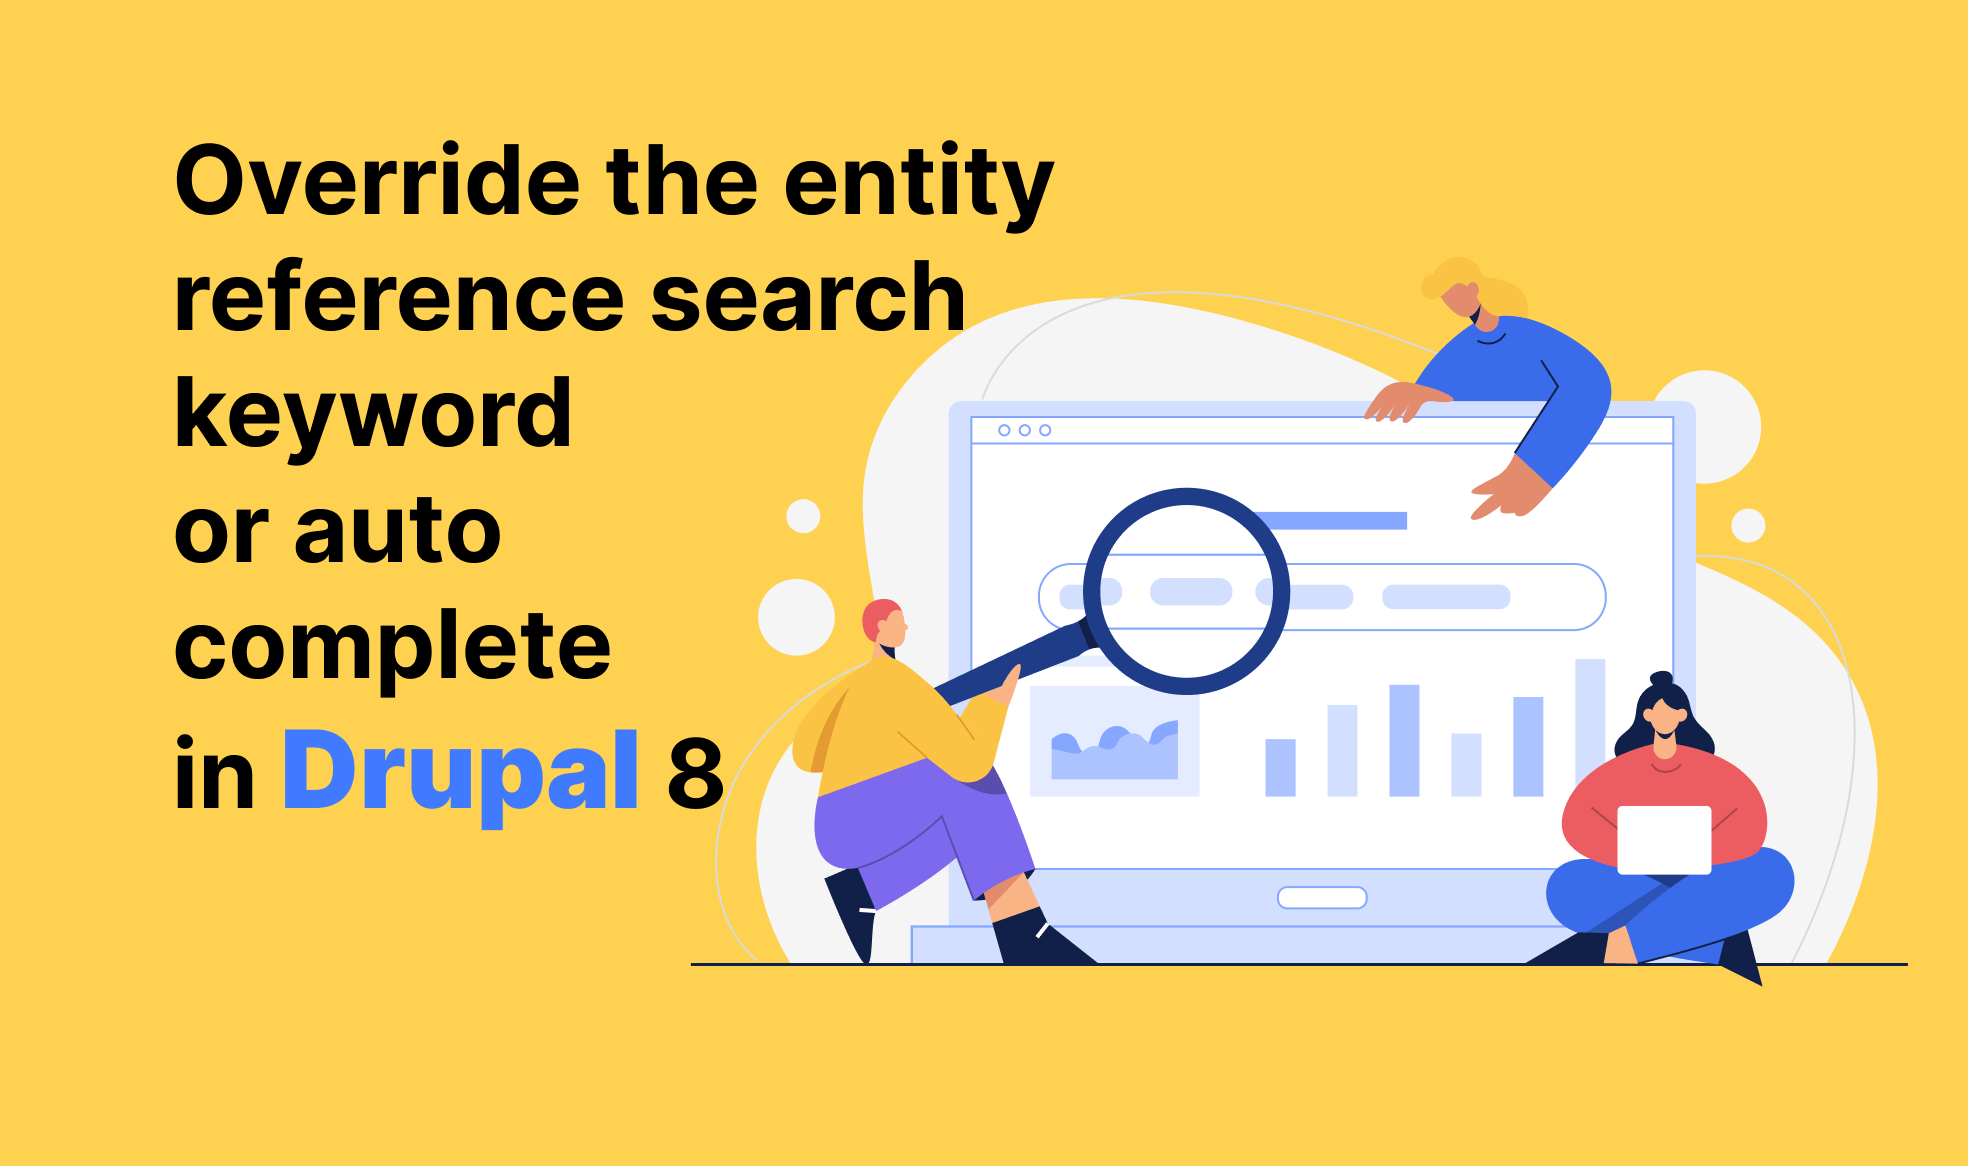 Override the entity reference search keyword or auto complete in Drupal 8 image